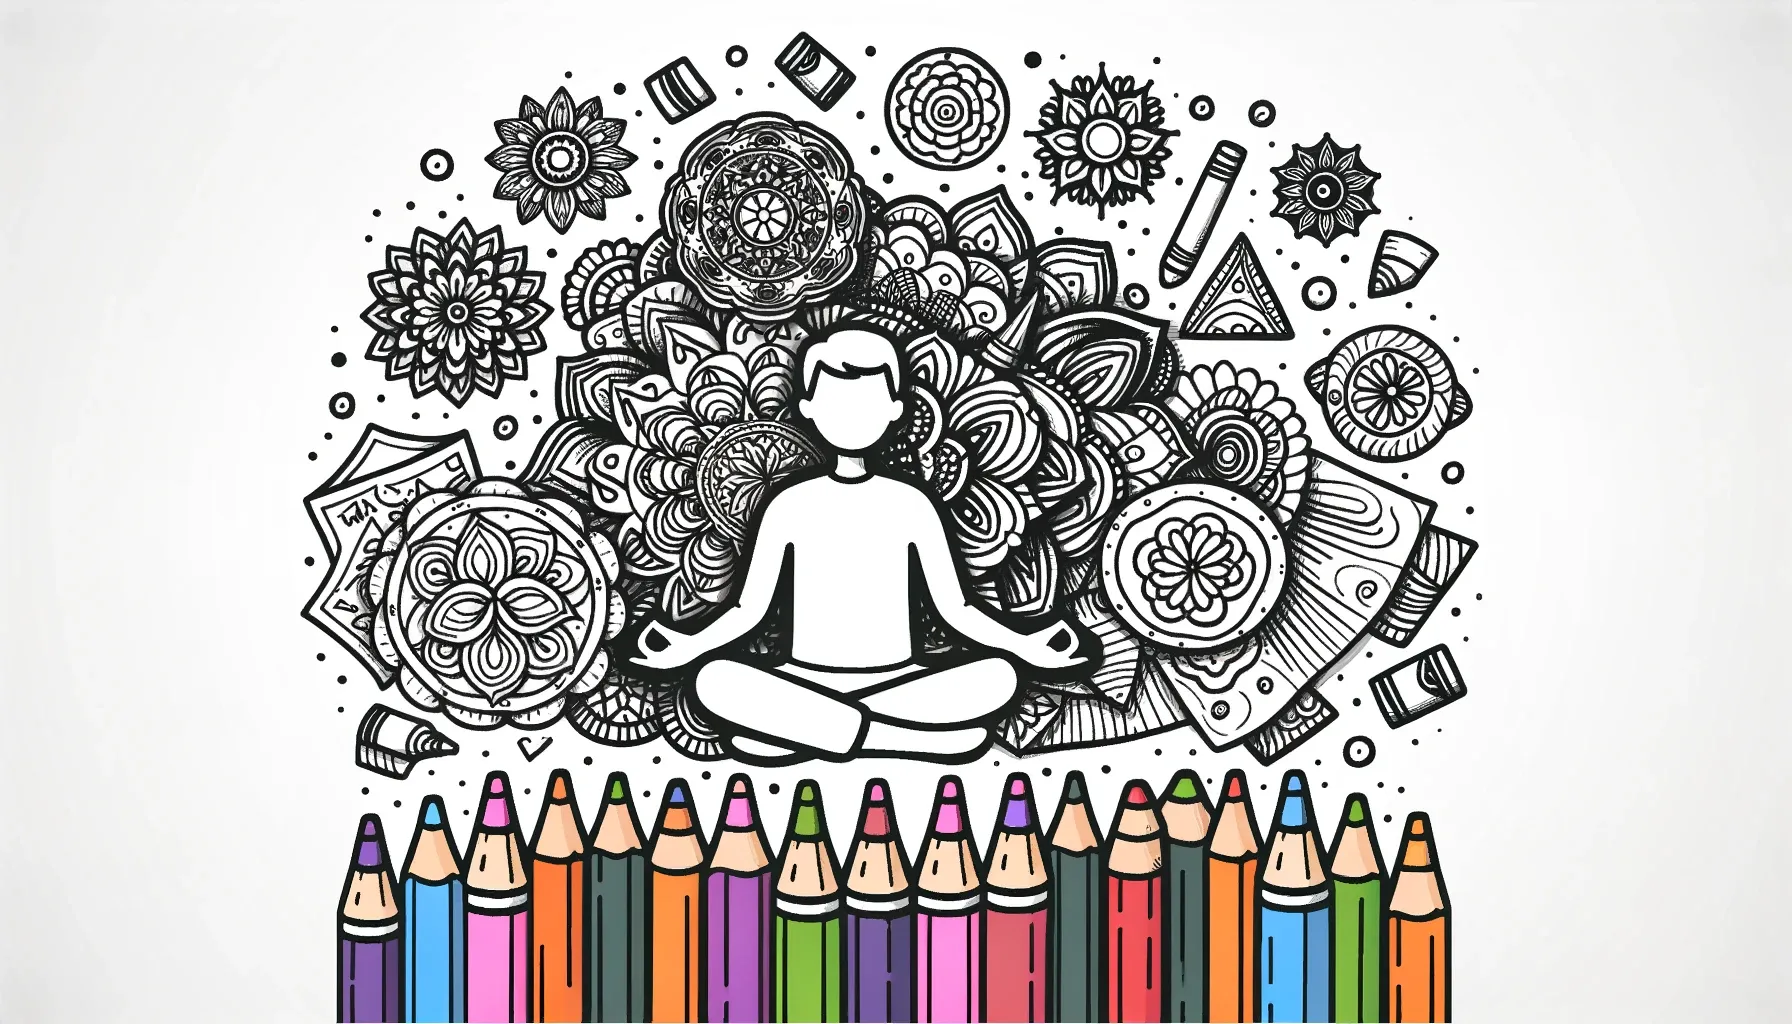 Wide childish doodle of a person meditating while surrounded by floating mandalas, crayons, and coloring pages. The atmosphere is serene, symbolizing the calmness brought about by coloring.